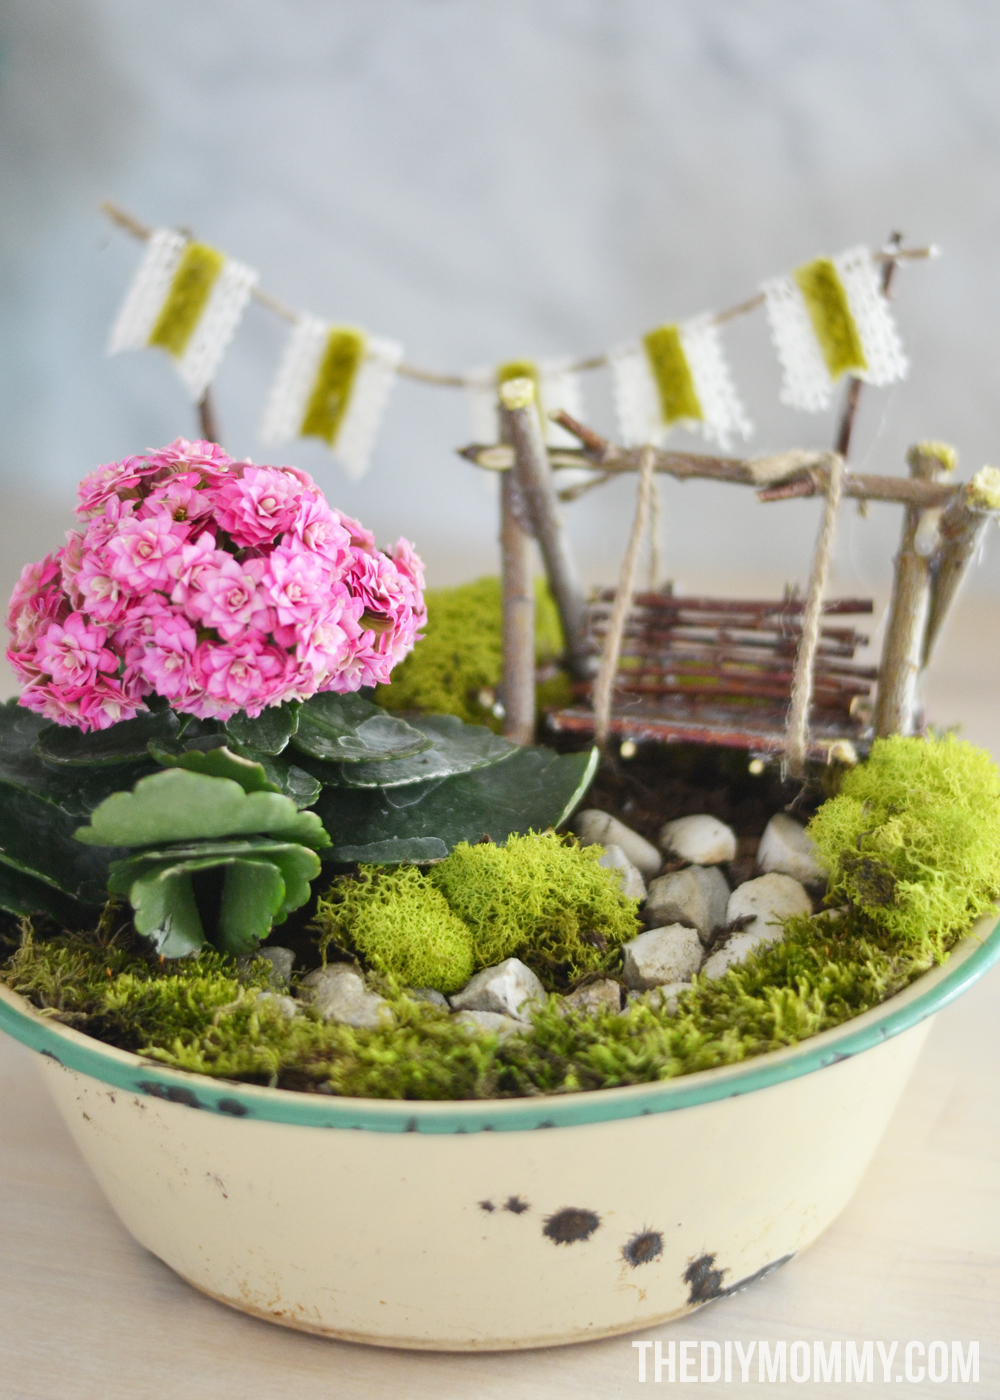 How to make a DIY mini fairy garden gift in a vintage enamelware planter.